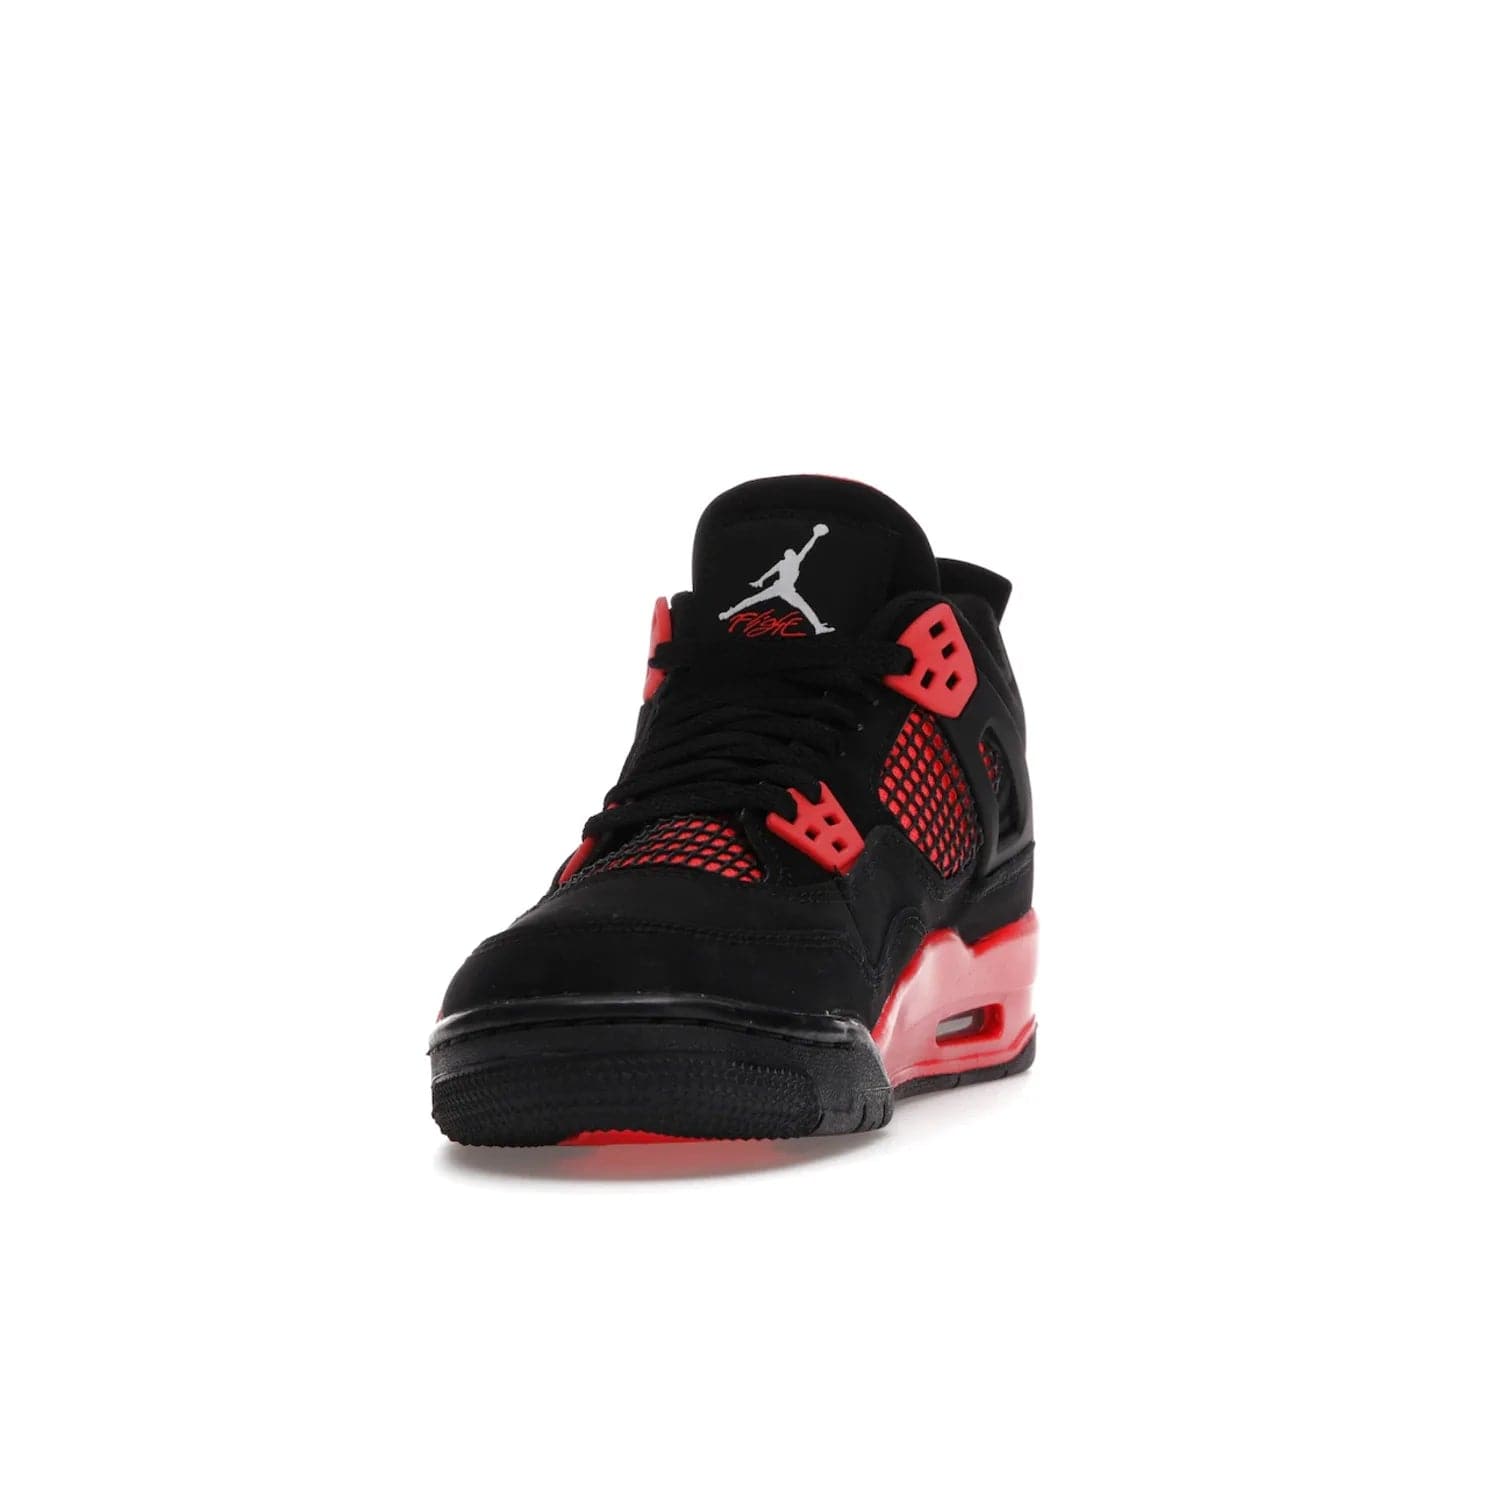 Jordan 4 Retro Red Thunder (GS) - Image 12 - Only at www.BallersClubKickz.com - The Air Jordan 4 Retro Red Thunder GS features a stylish black and crimson upper with a Jumpman logo. Athletic midsole with Air bubbles for cushioning and black rubber outsole with iconic motif complete this classic sneaker.